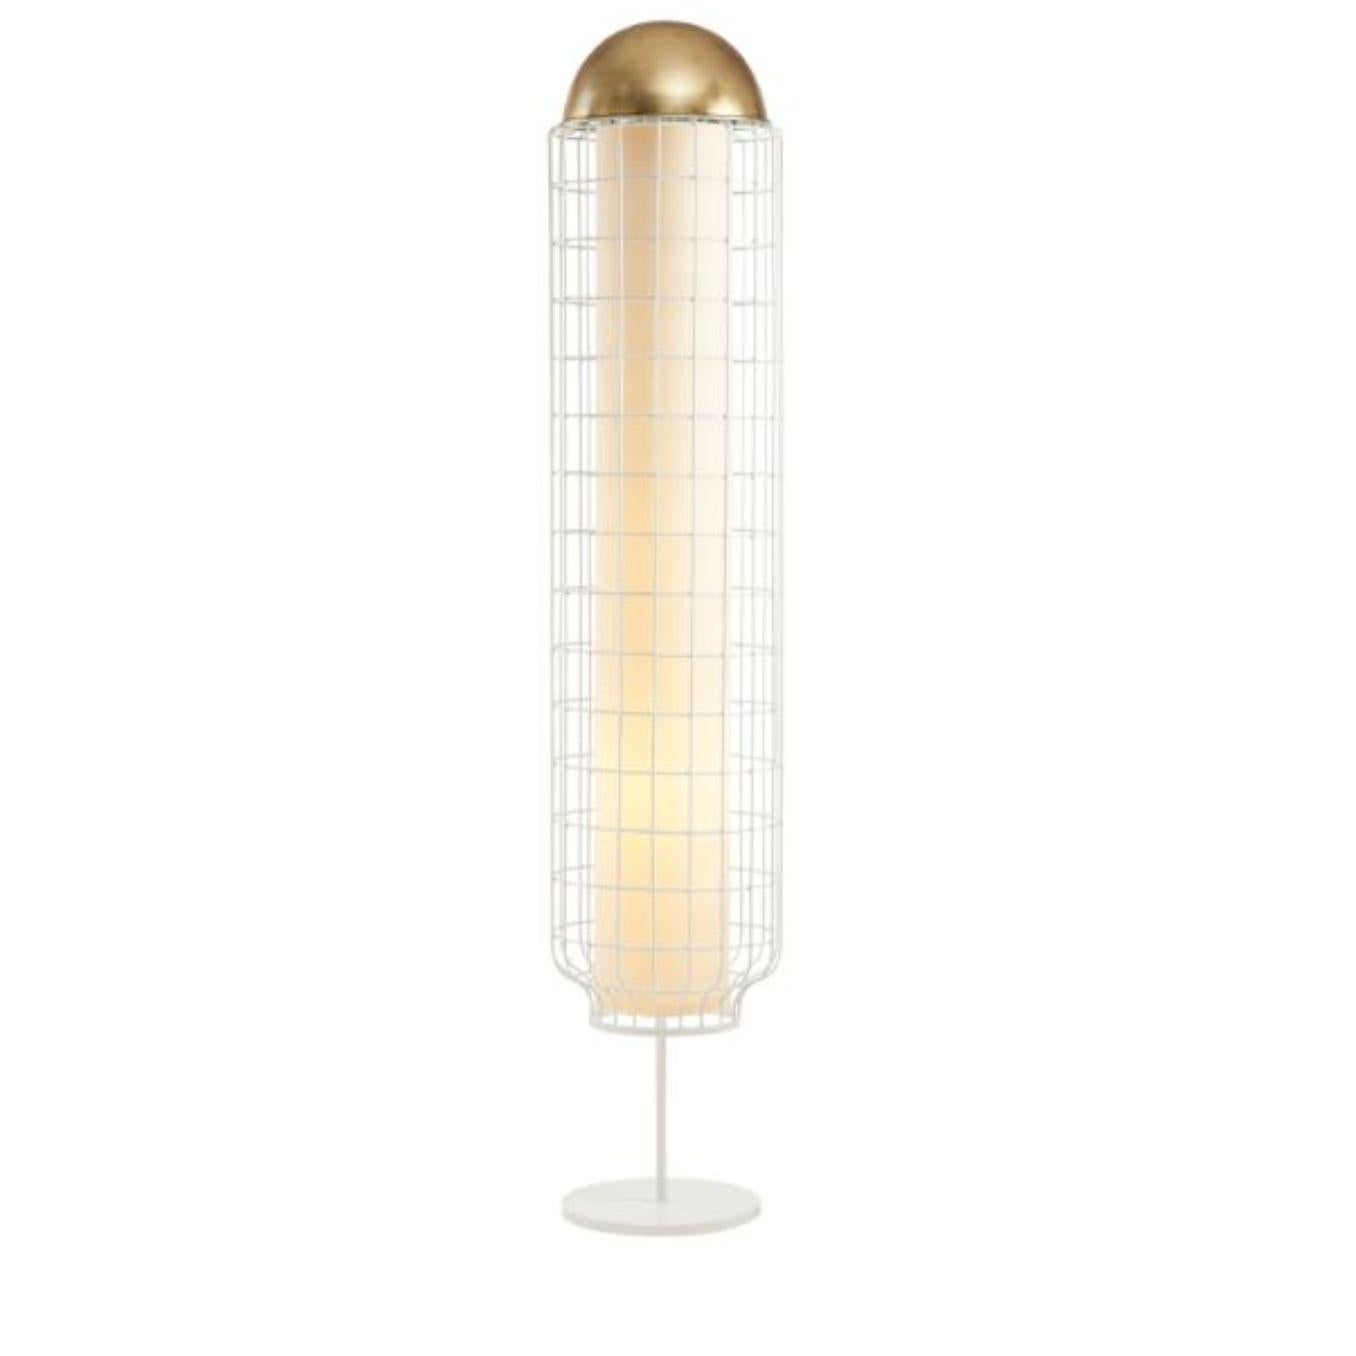 Brass and ivory Magnolia floor lamp by Dooq
Dimensions: W 37 x D 37 x H 170 cm
Materials: lacquered metal, polished or brushed metal, brass.
abat-jour: cotton
Also available in different colours and materials.

Information:
230V/50Hz
E27/2x20W